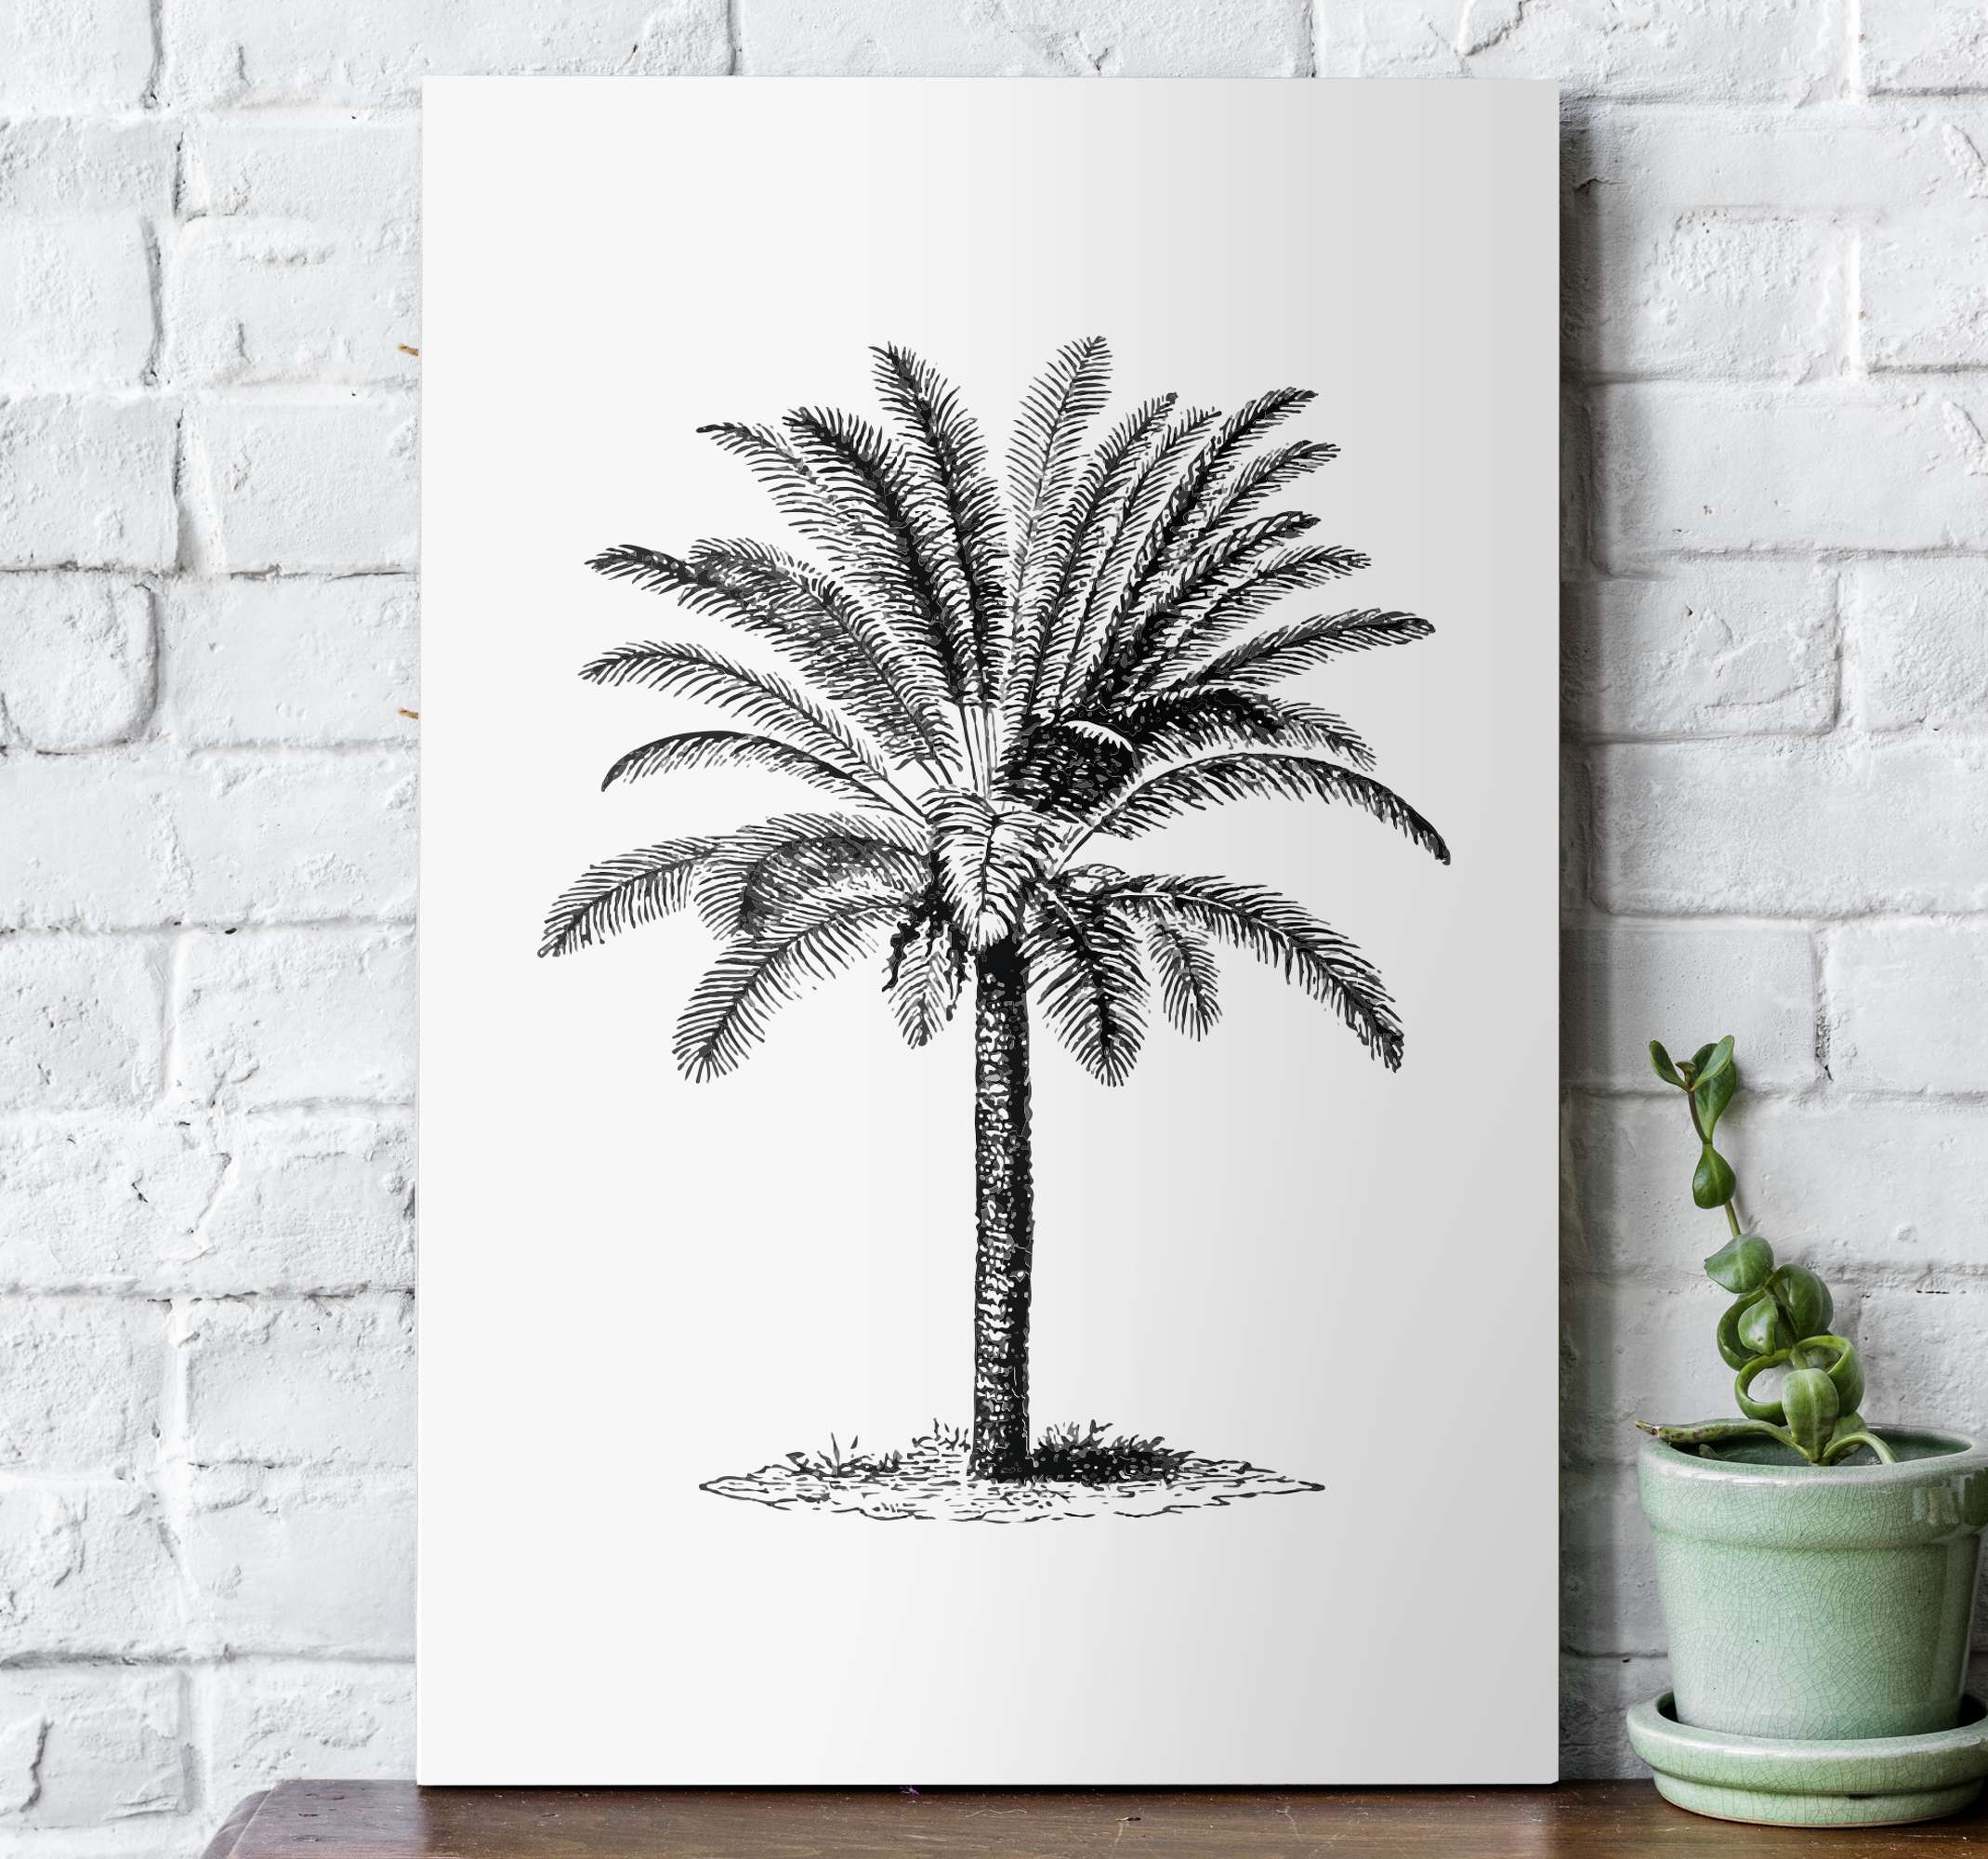 32795 Palm Tree Coconut Stock Photos HighRes Pictures and Images   Getty Images